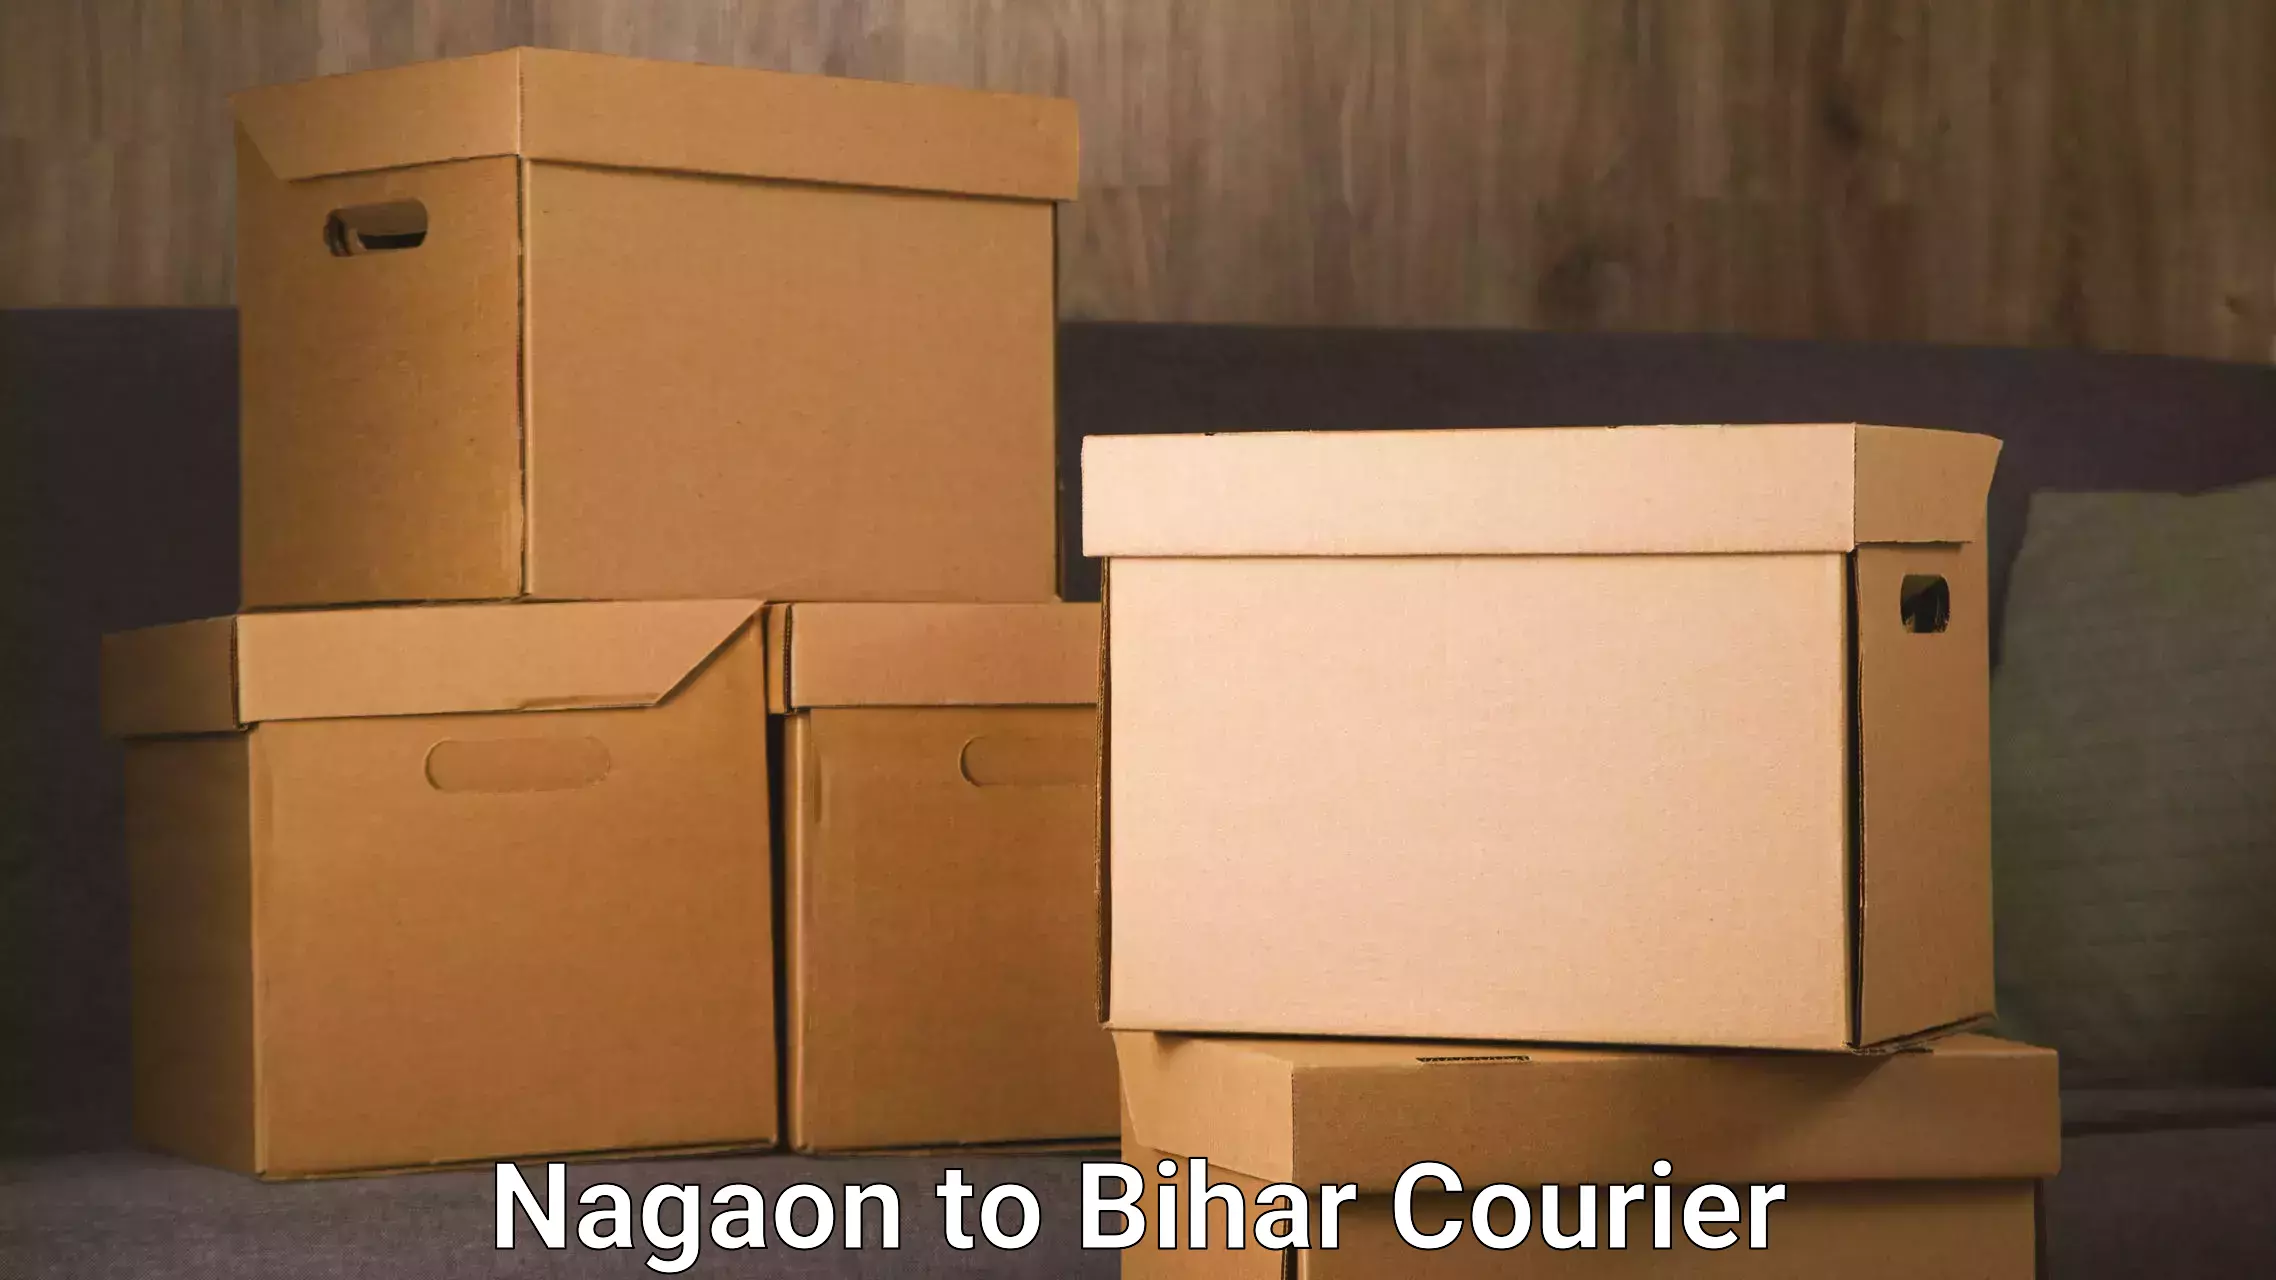 Round-the-clock parcel delivery Nagaon to Khodaganj